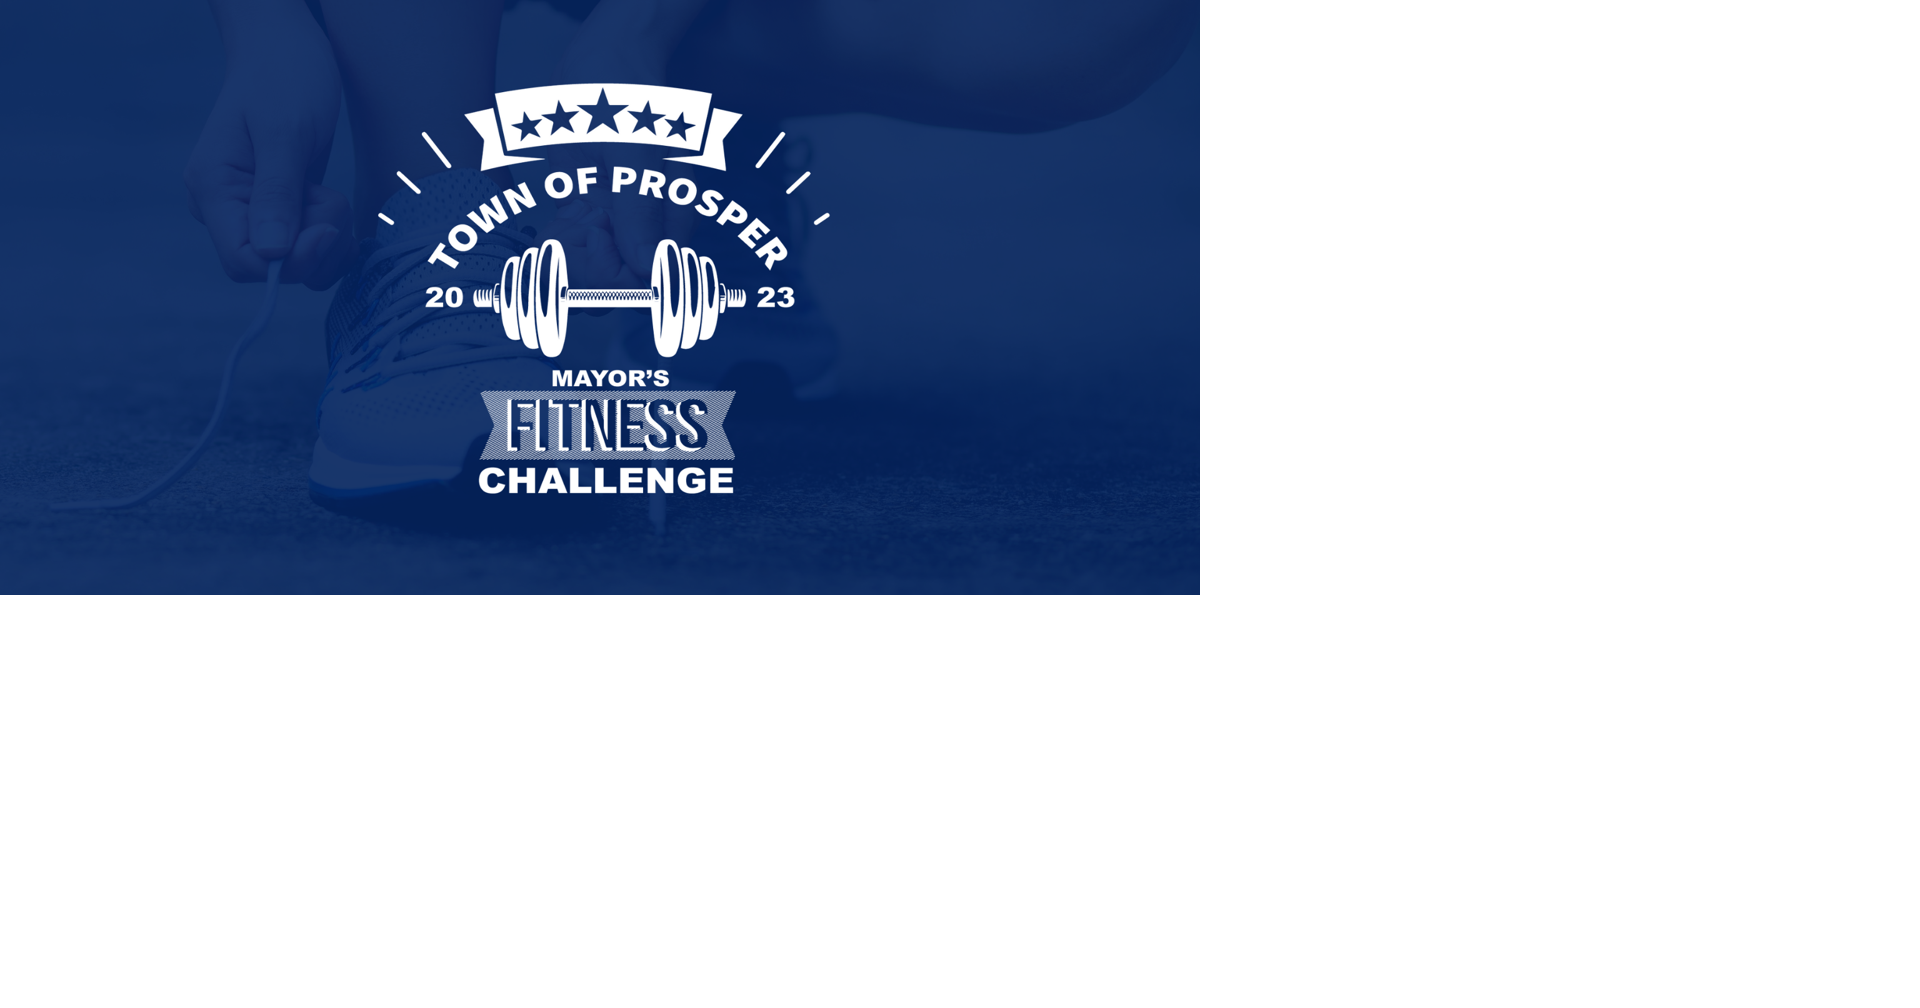 Prosper residents invited to participate in Mayor’s Fitness Challenge